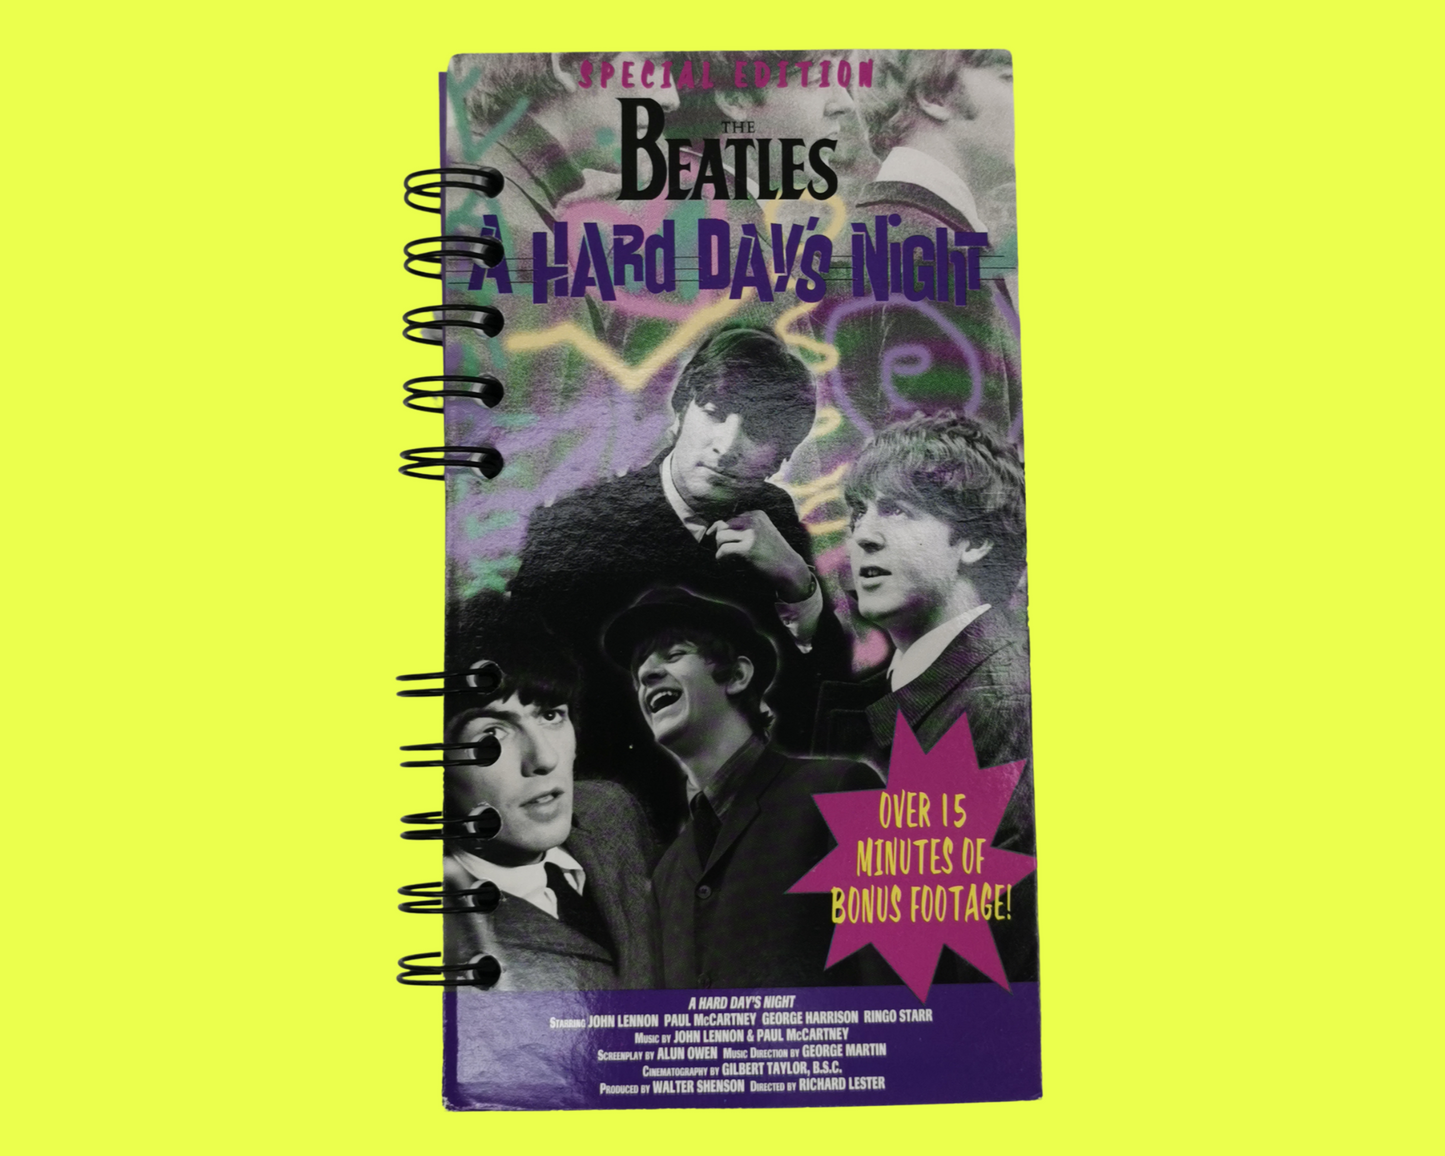 The Beatles A Hard Days Night VHS Movie Notebook